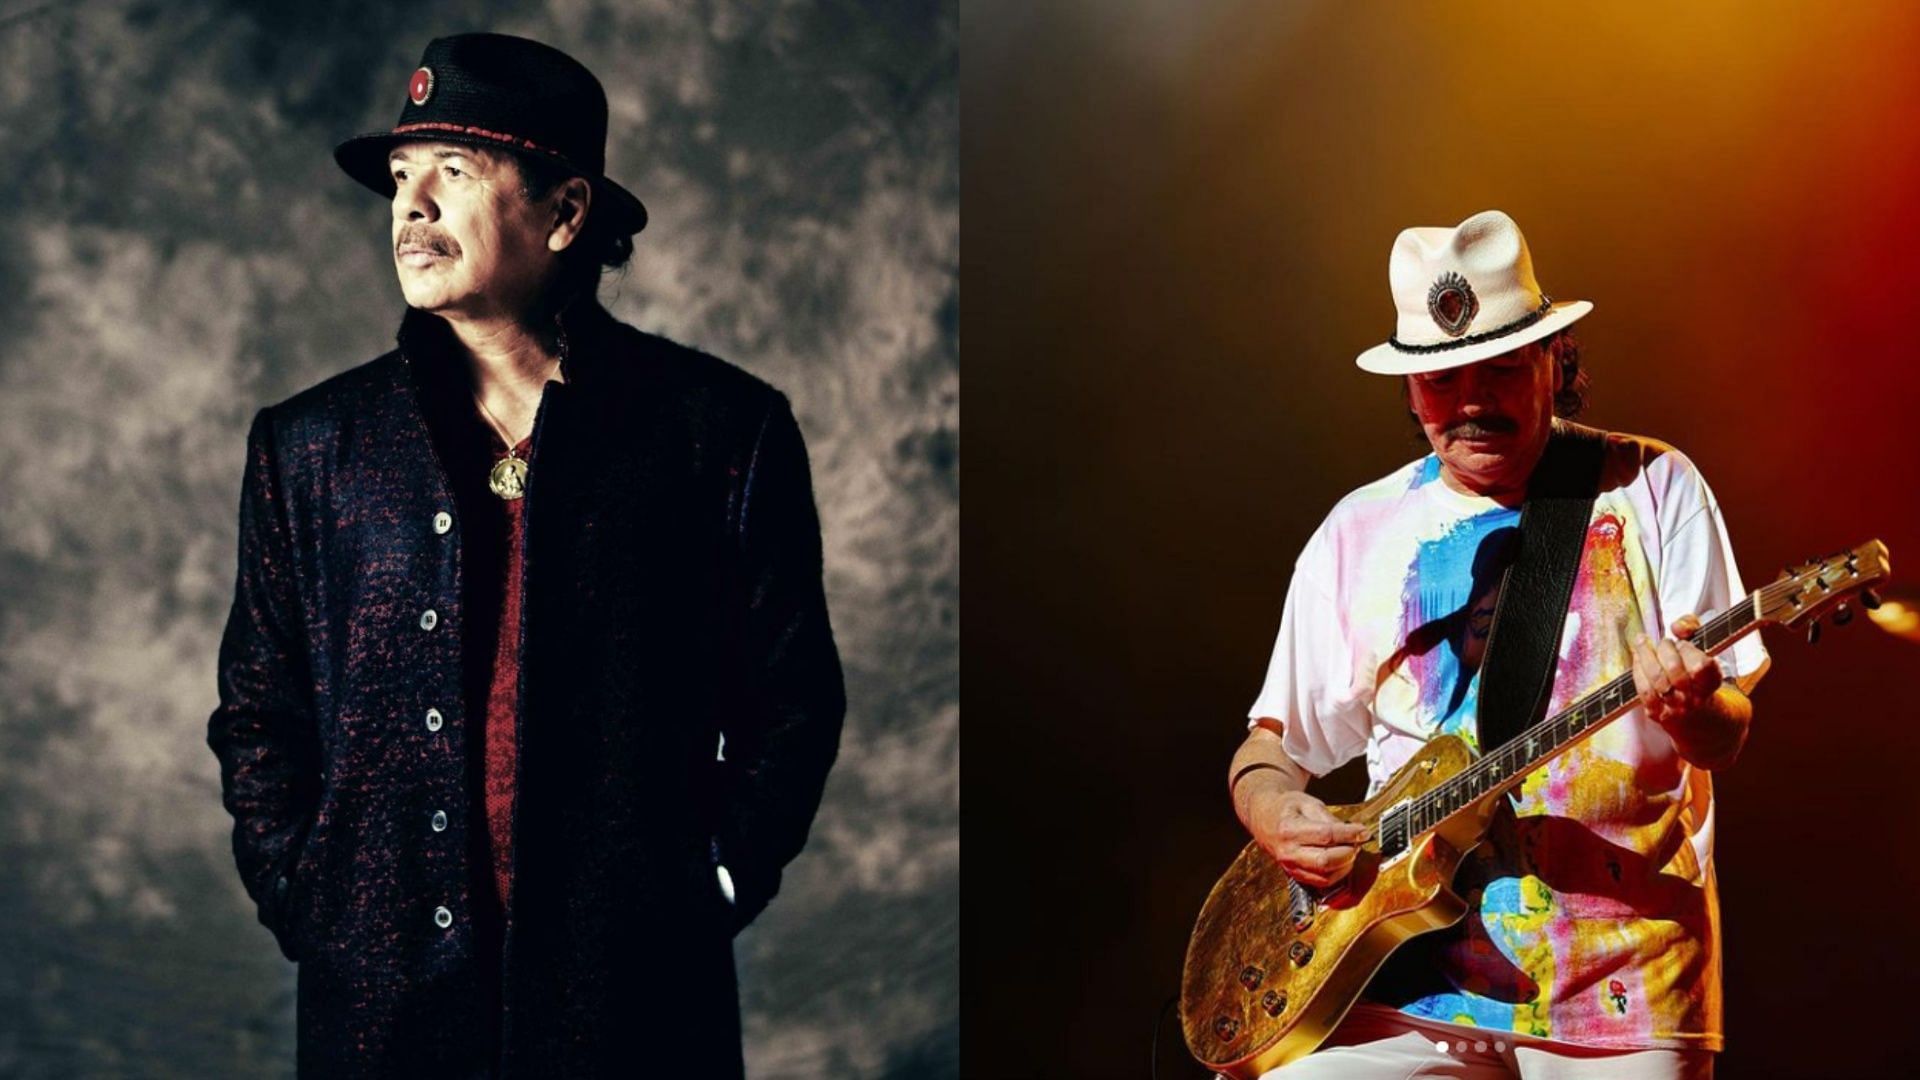 Carlos Santana recently came under fire after his anti-trans and anti-LGBTQ remarks on stage. (Image via Instagram/carlossantana)